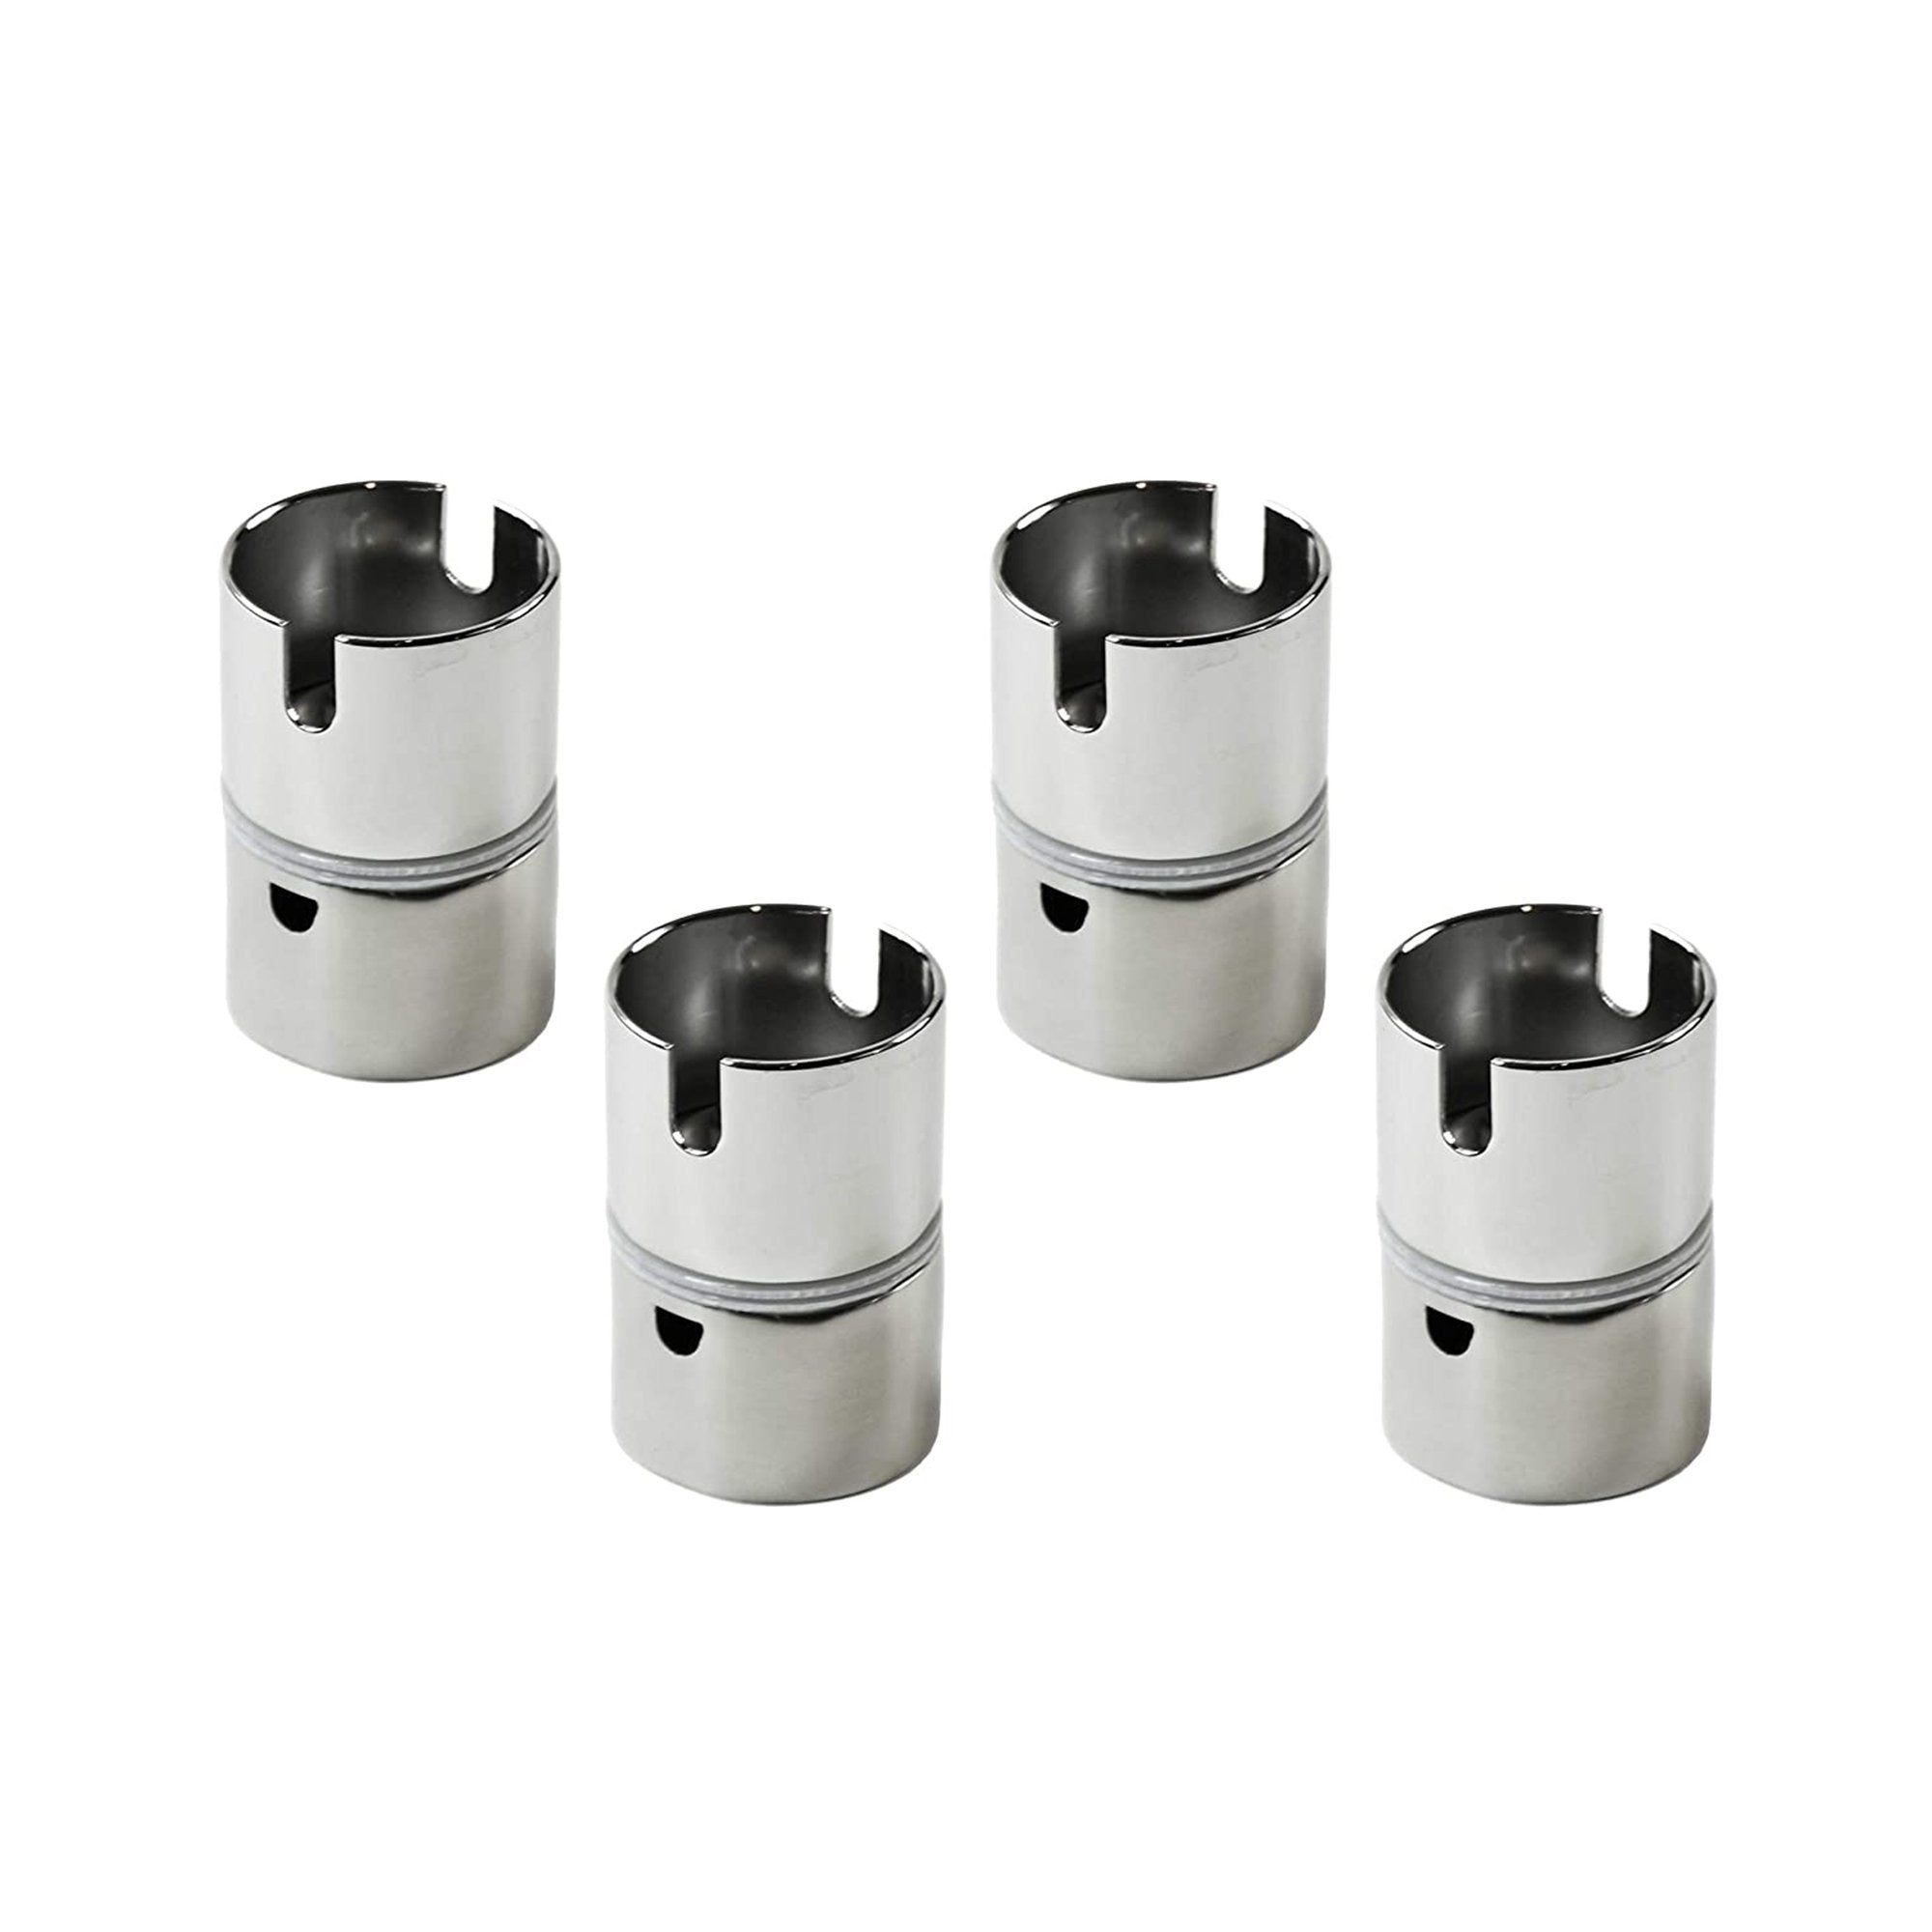 Marine City 316 Stainless Steel Drop-in Swivel for Rod Holder for Marine Boat Yacht Fishing (4 Pcs)